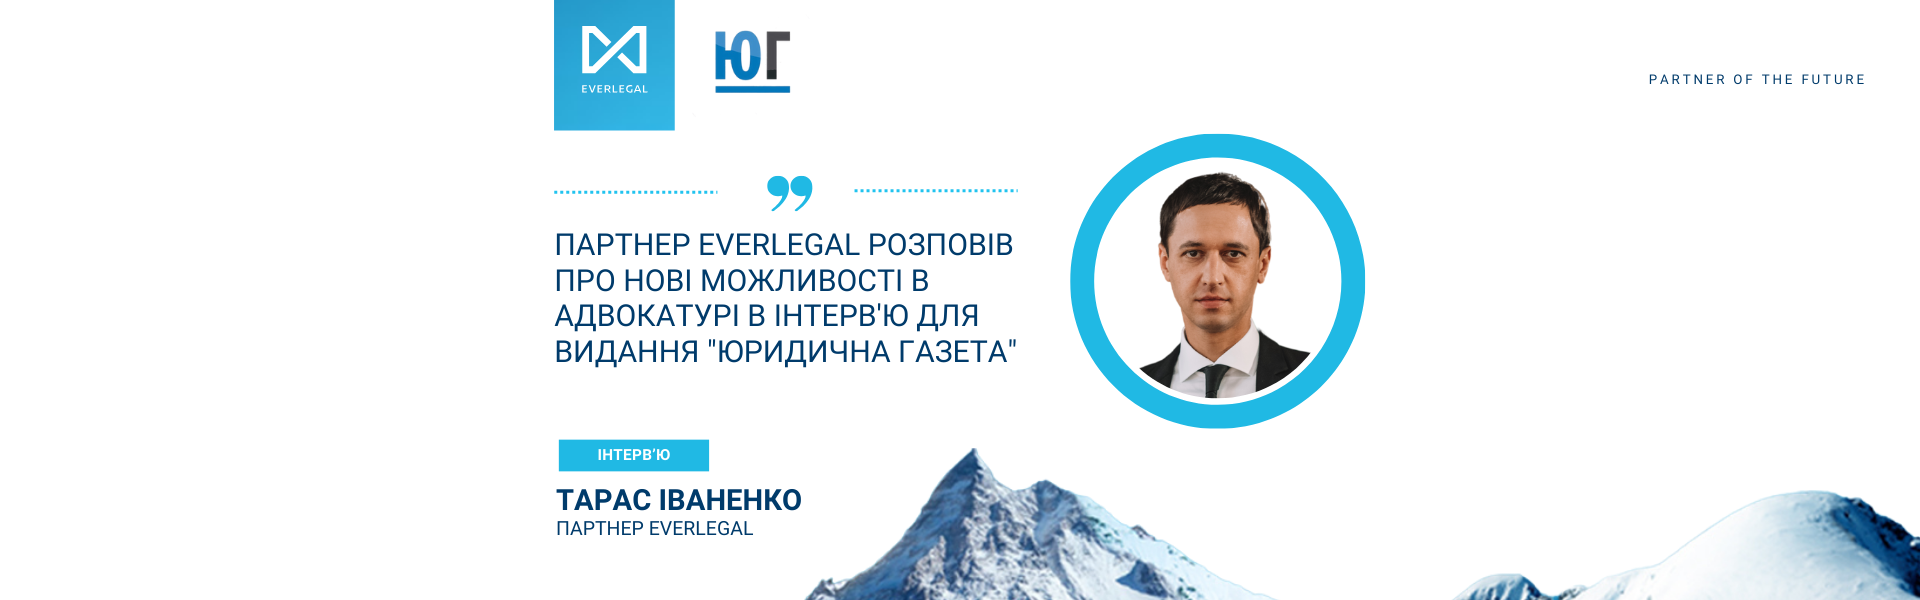 EVERLEGAL Partner - about new opportunities in the legal profession: interview for the Yurydychna Gazeta